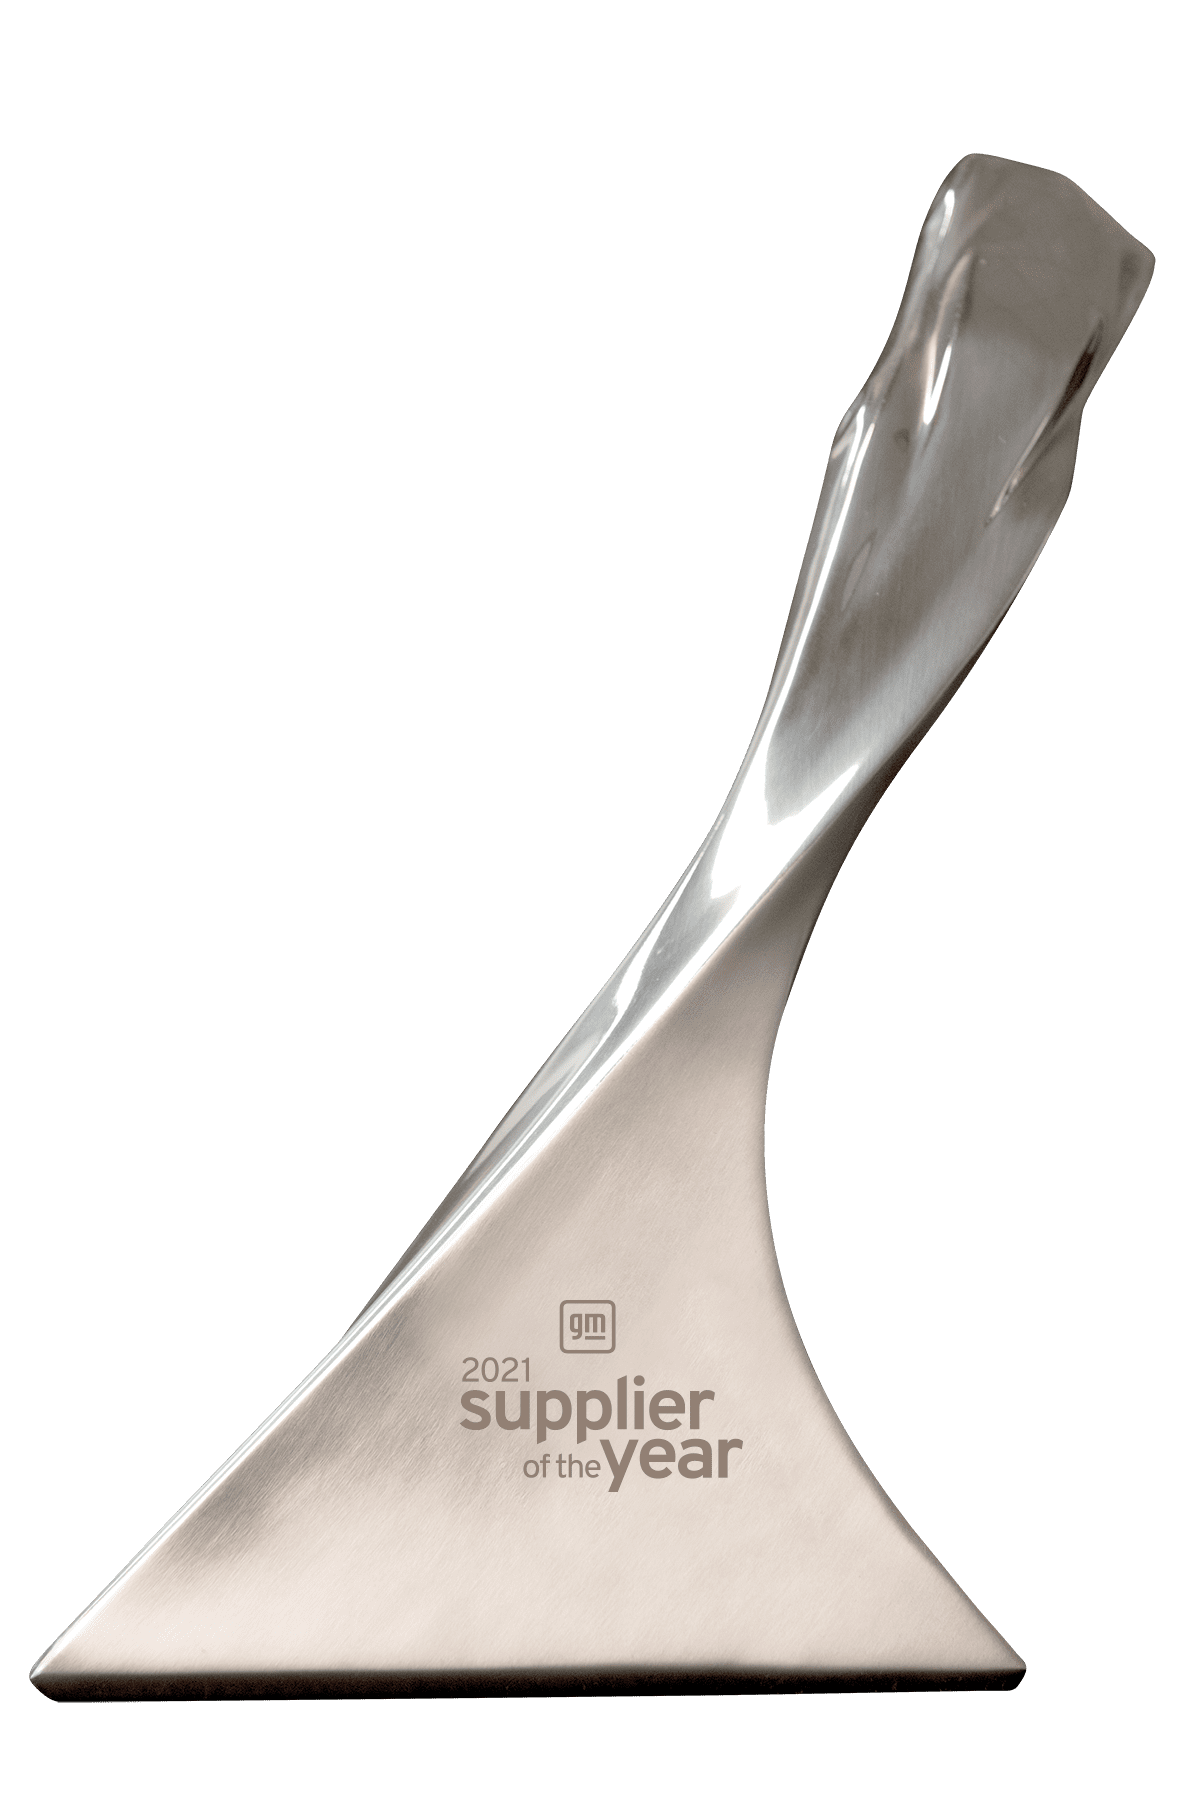 General Motors Names Cooper Standard a 2021 Supplier of the Year